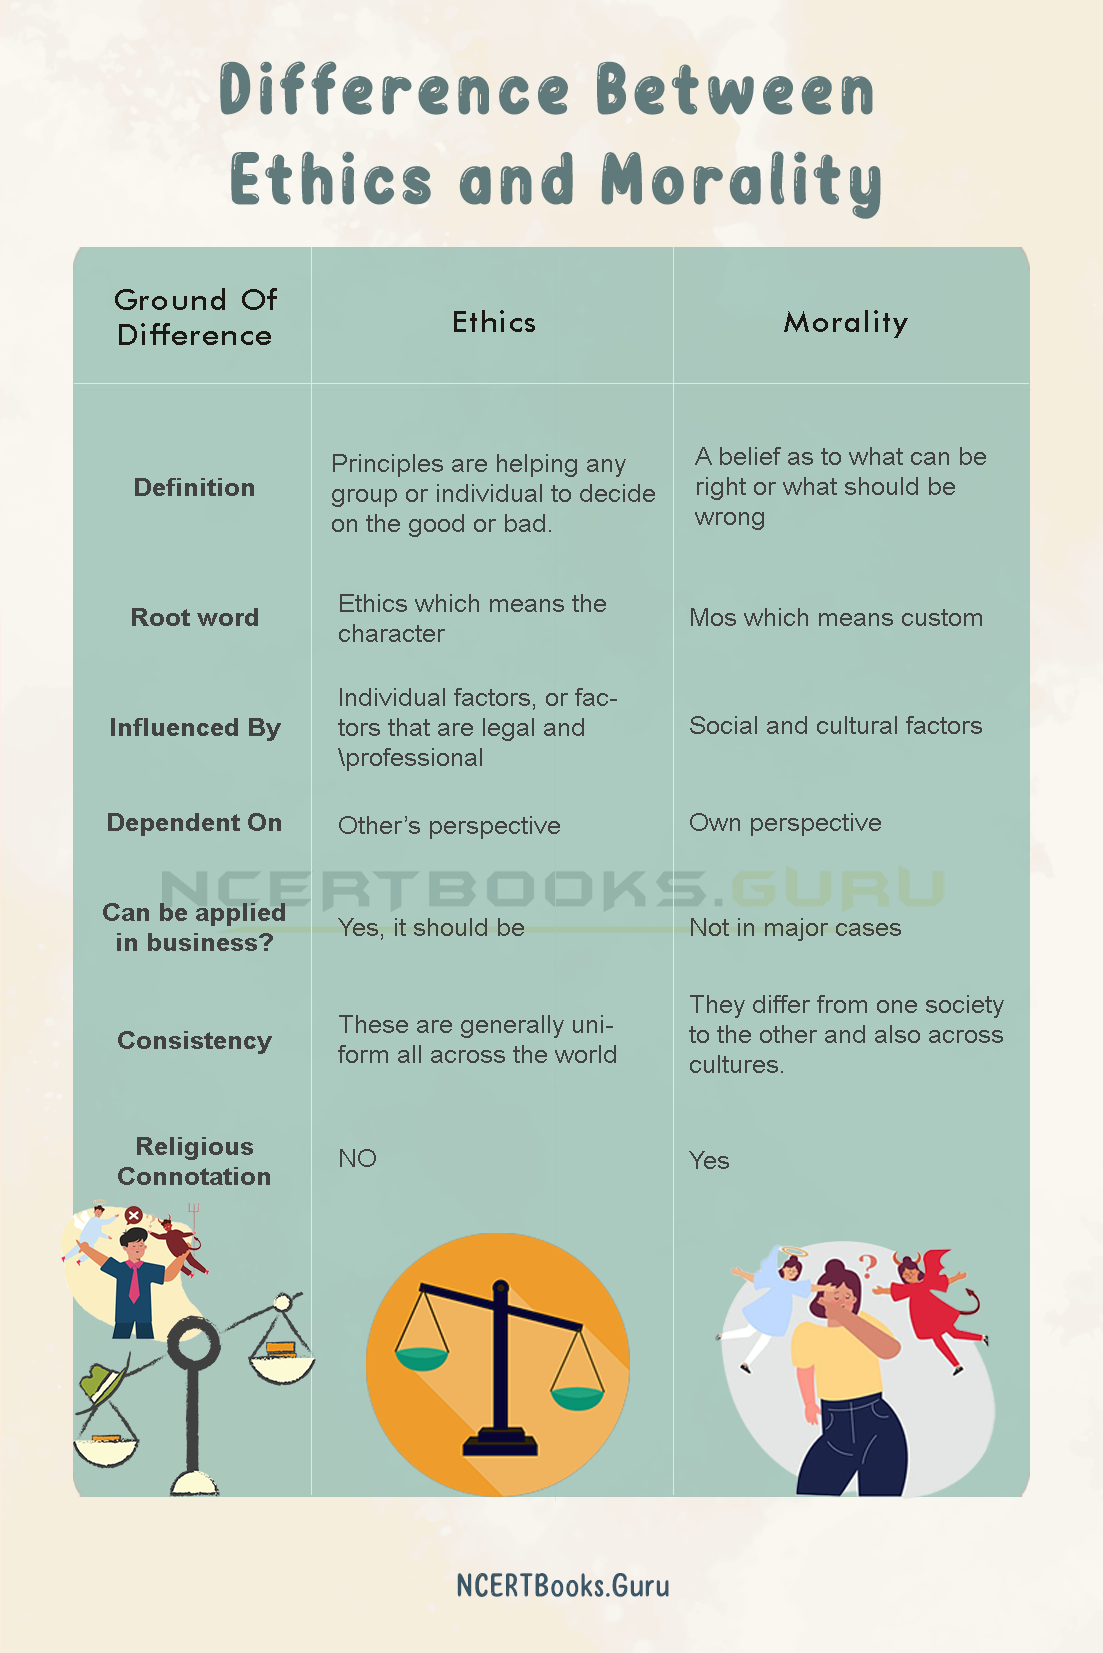 Difference Between Ethics and Morality & Their Similarities - NCERT Books